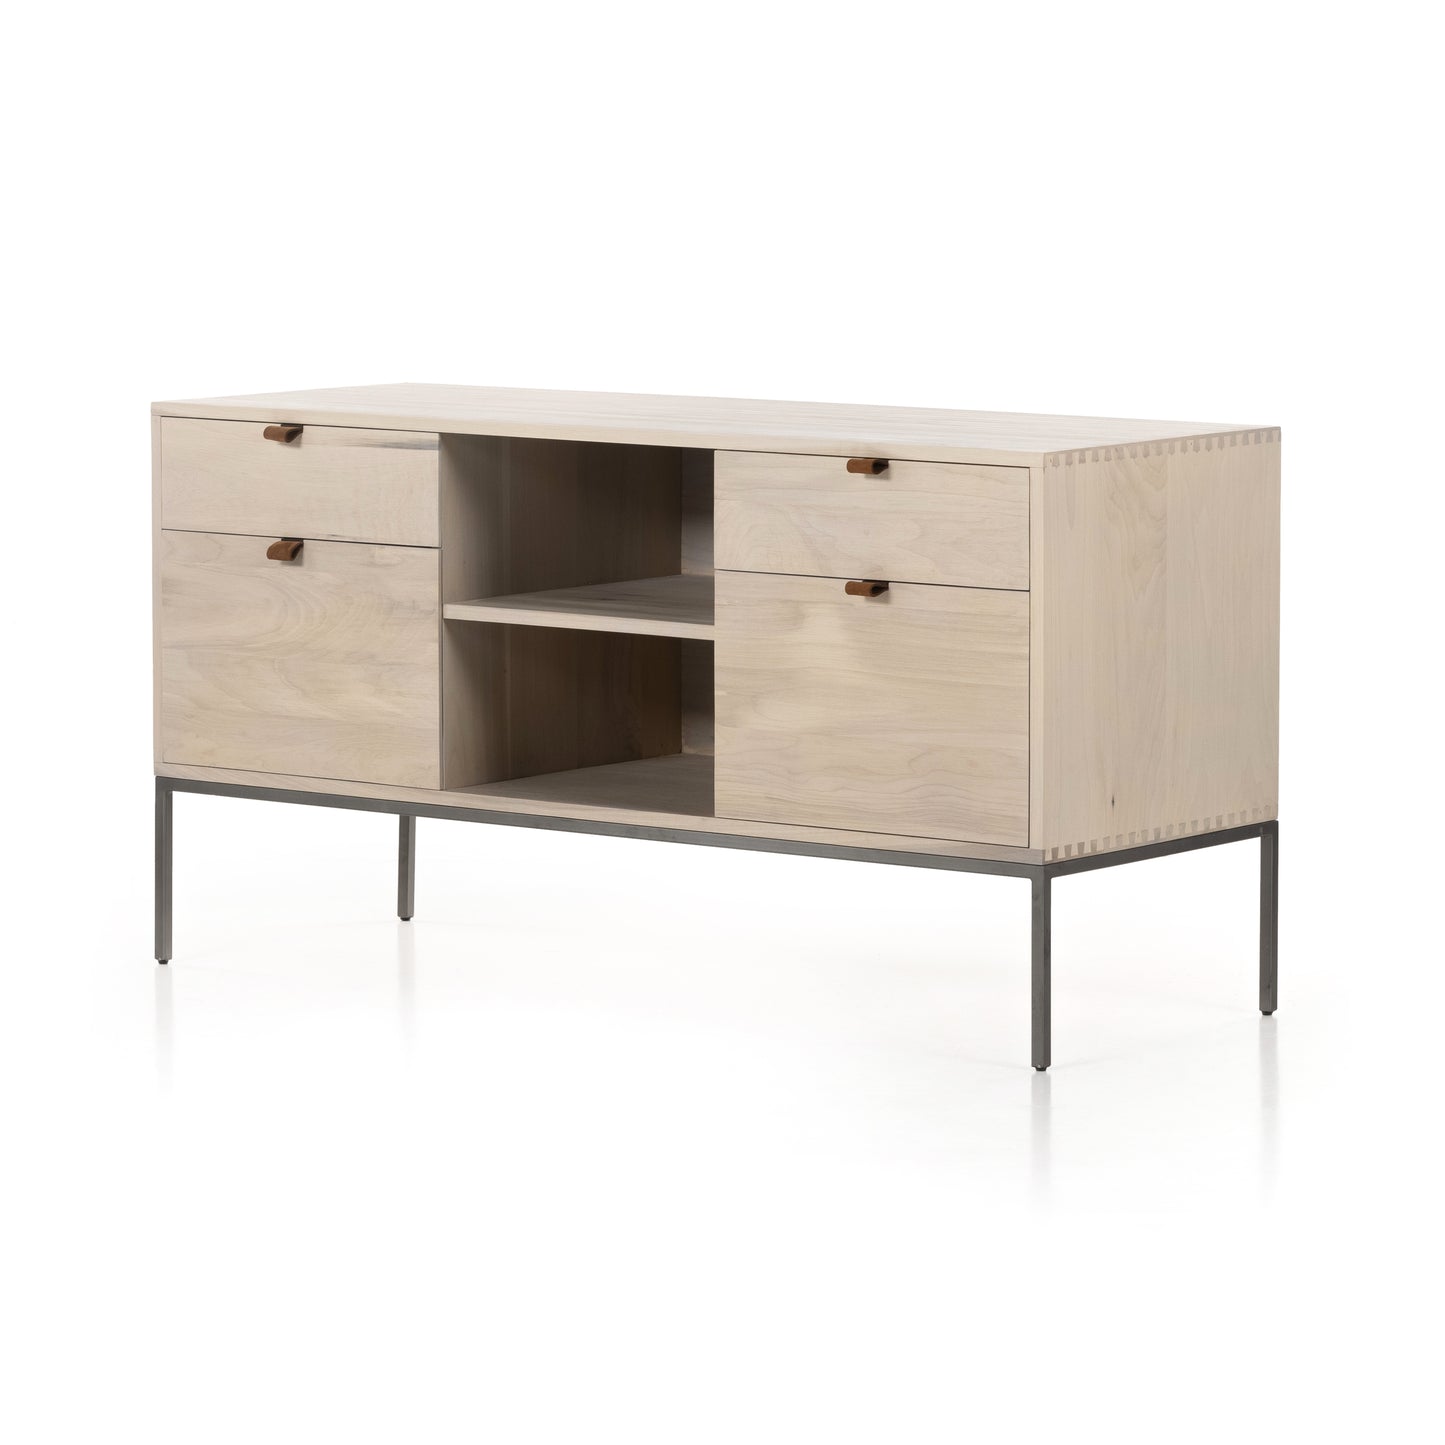 Load image into Gallery viewer, Trey Modular Filing Credenza Dove PoplarFiling Cabinets Four Hands  Dove Poplar   Four Hands, Mid Century Modern Furniture, Old Bones Furniture Company, Old Bones Co, Modern Mid Century, Designer Furniture, https://www.oldbonesco.com/
